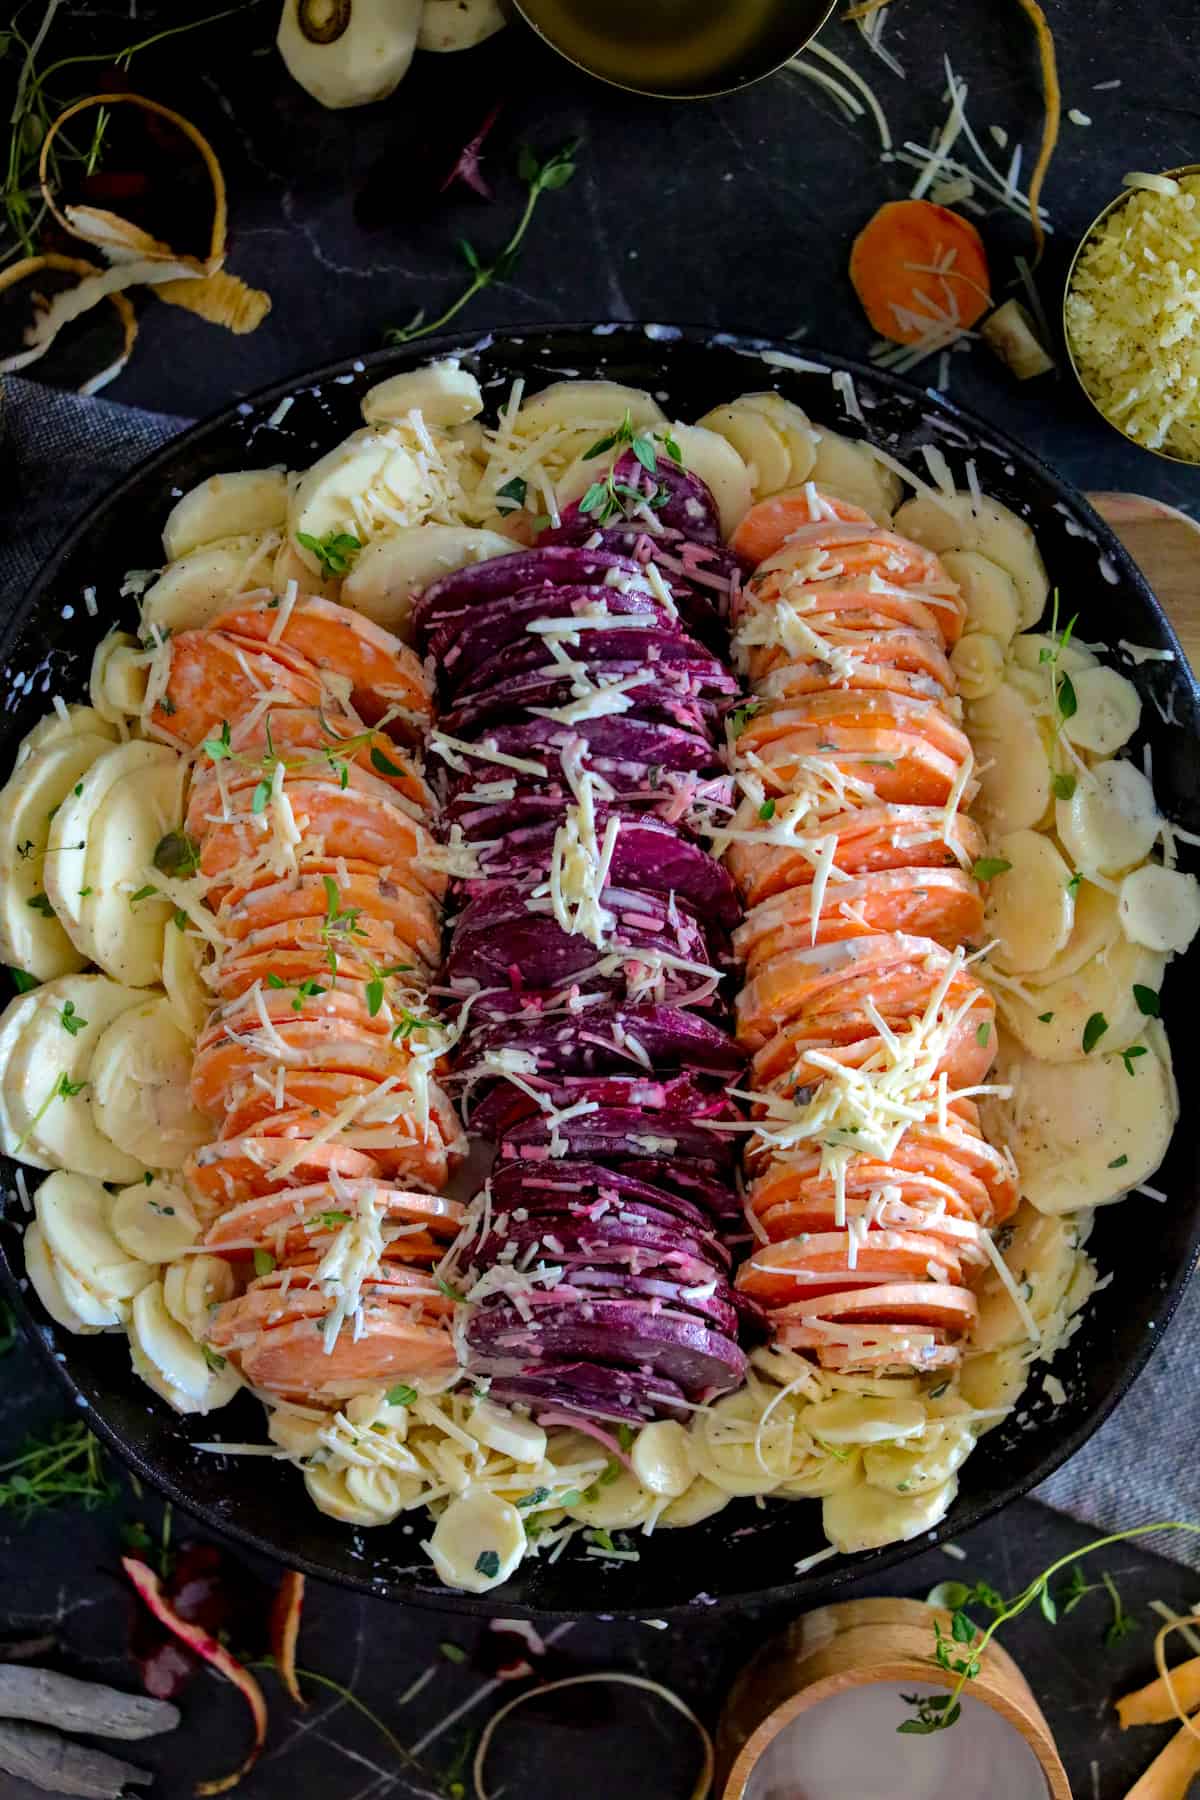 Vegetables in dish by color with sauce and cheese on top.